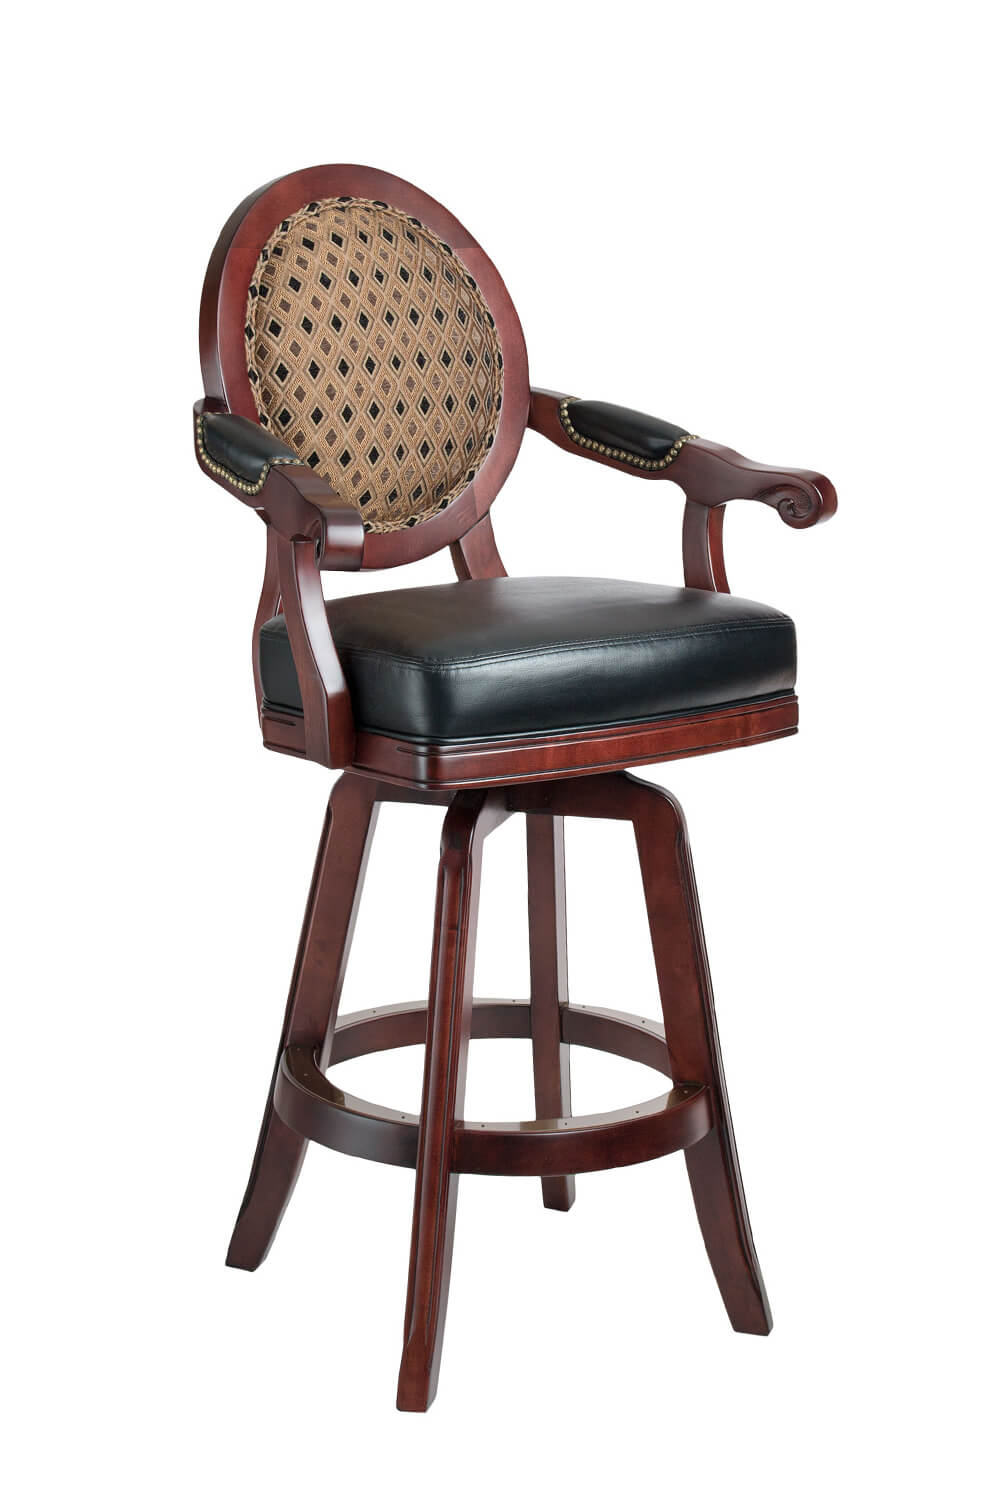 Darafeev's Chantal Wood Upholstered Swivel Stool with Arms